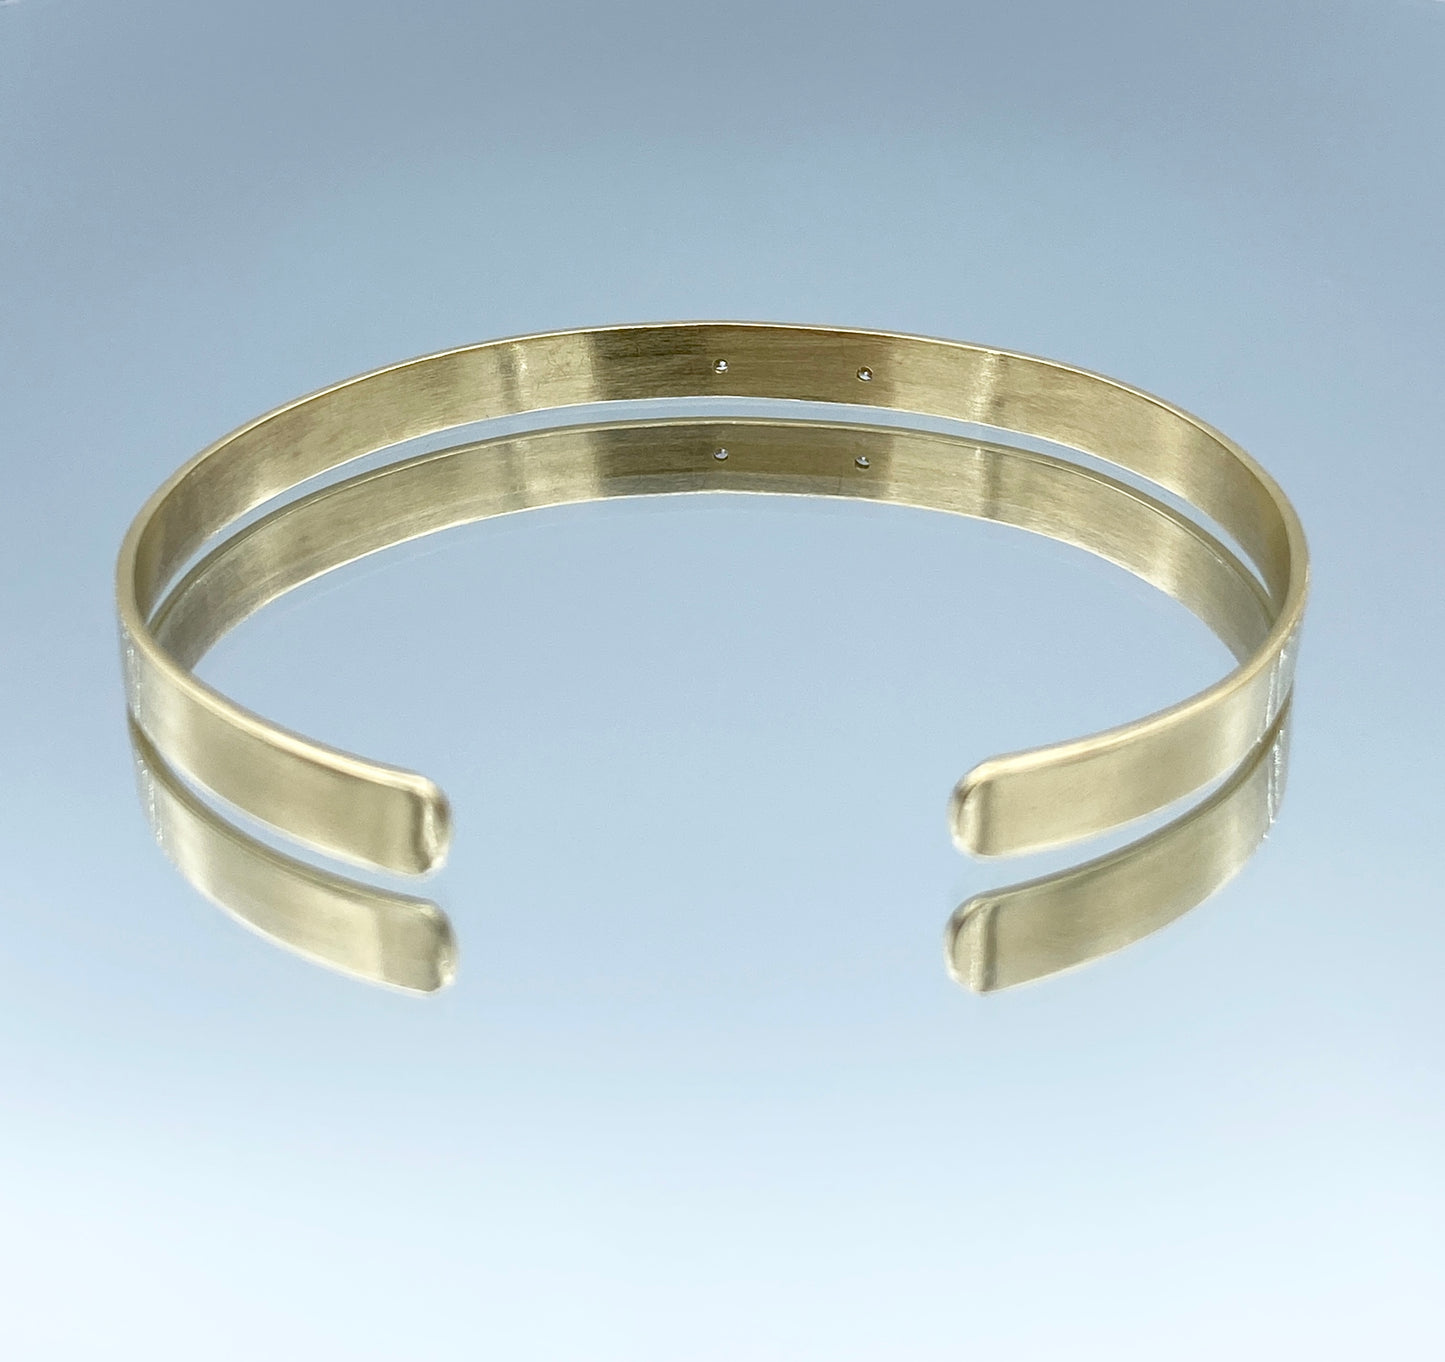 Roman Numeral Cuff Bracelet with a Diamond in 14K Yellow Gold - L and L Jewelry